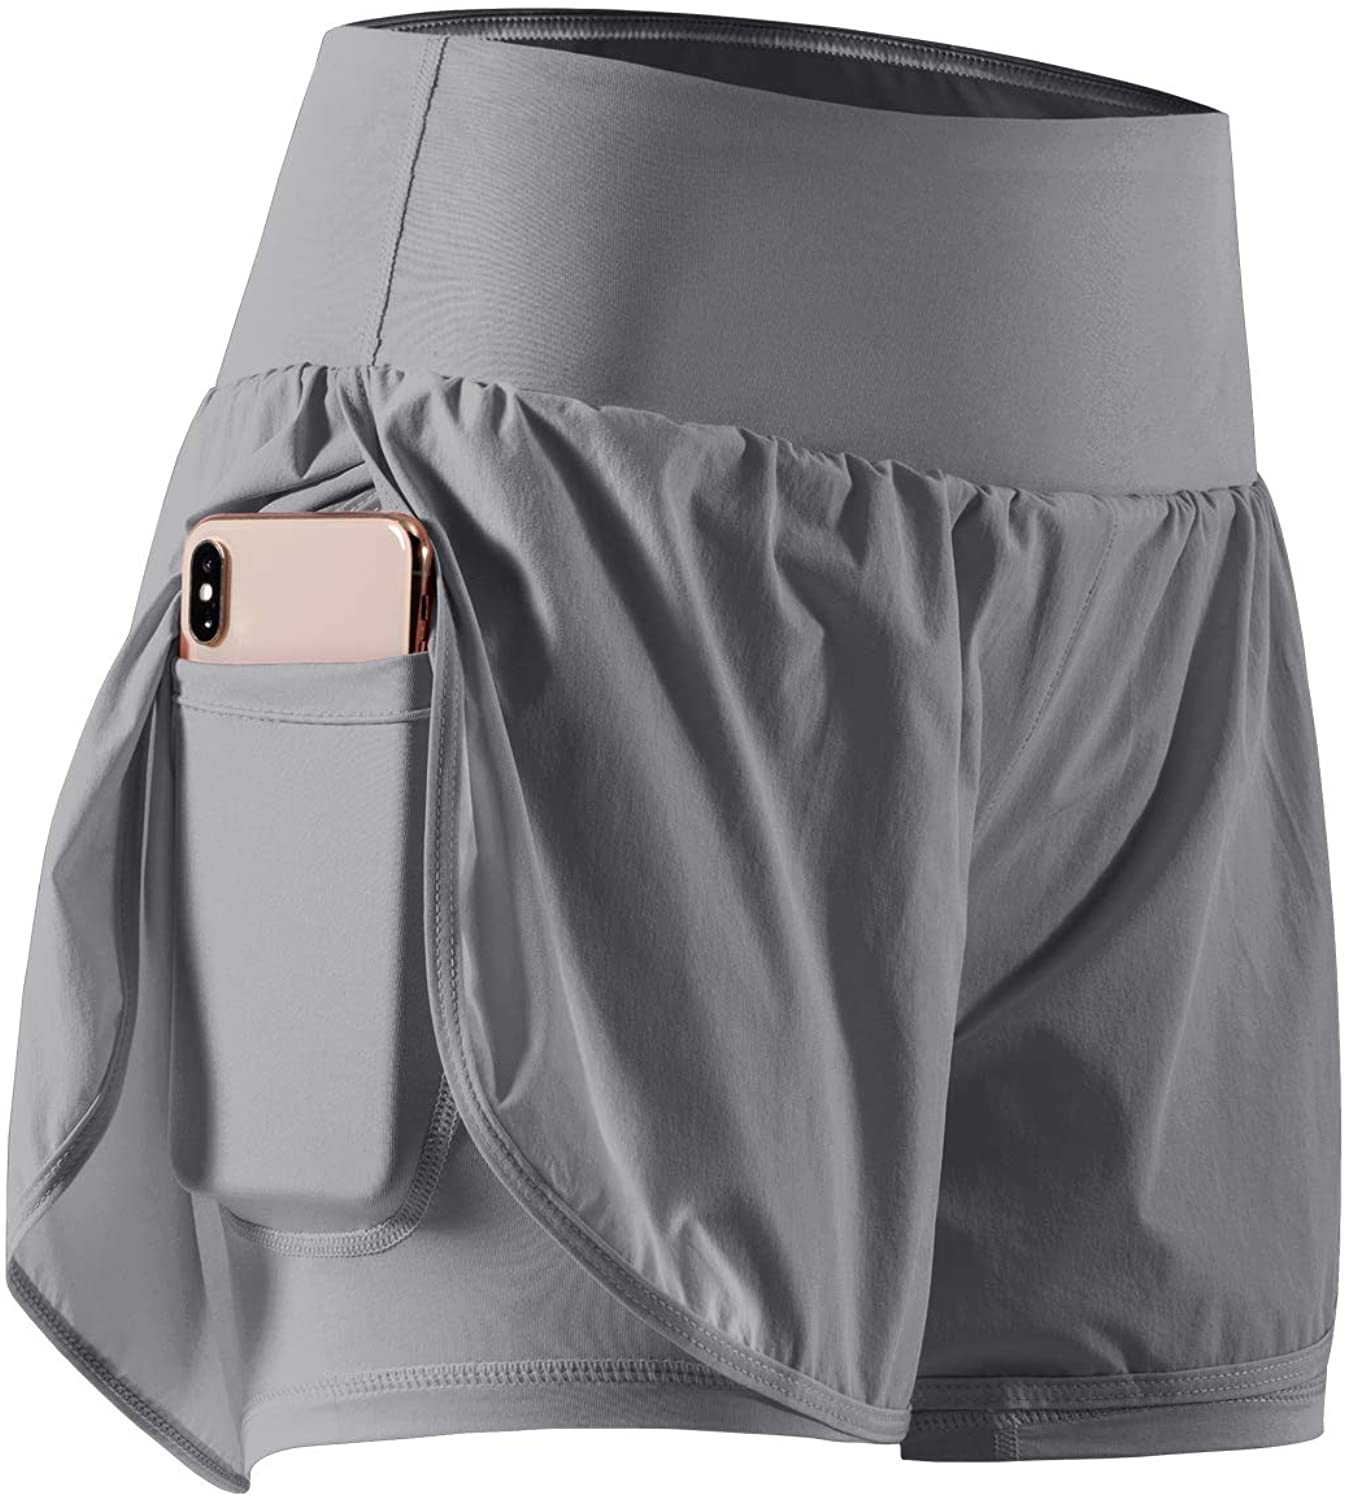 CADMUS 2 in 1 Gray Workout Athletic Gym Running Shorts Womens Size